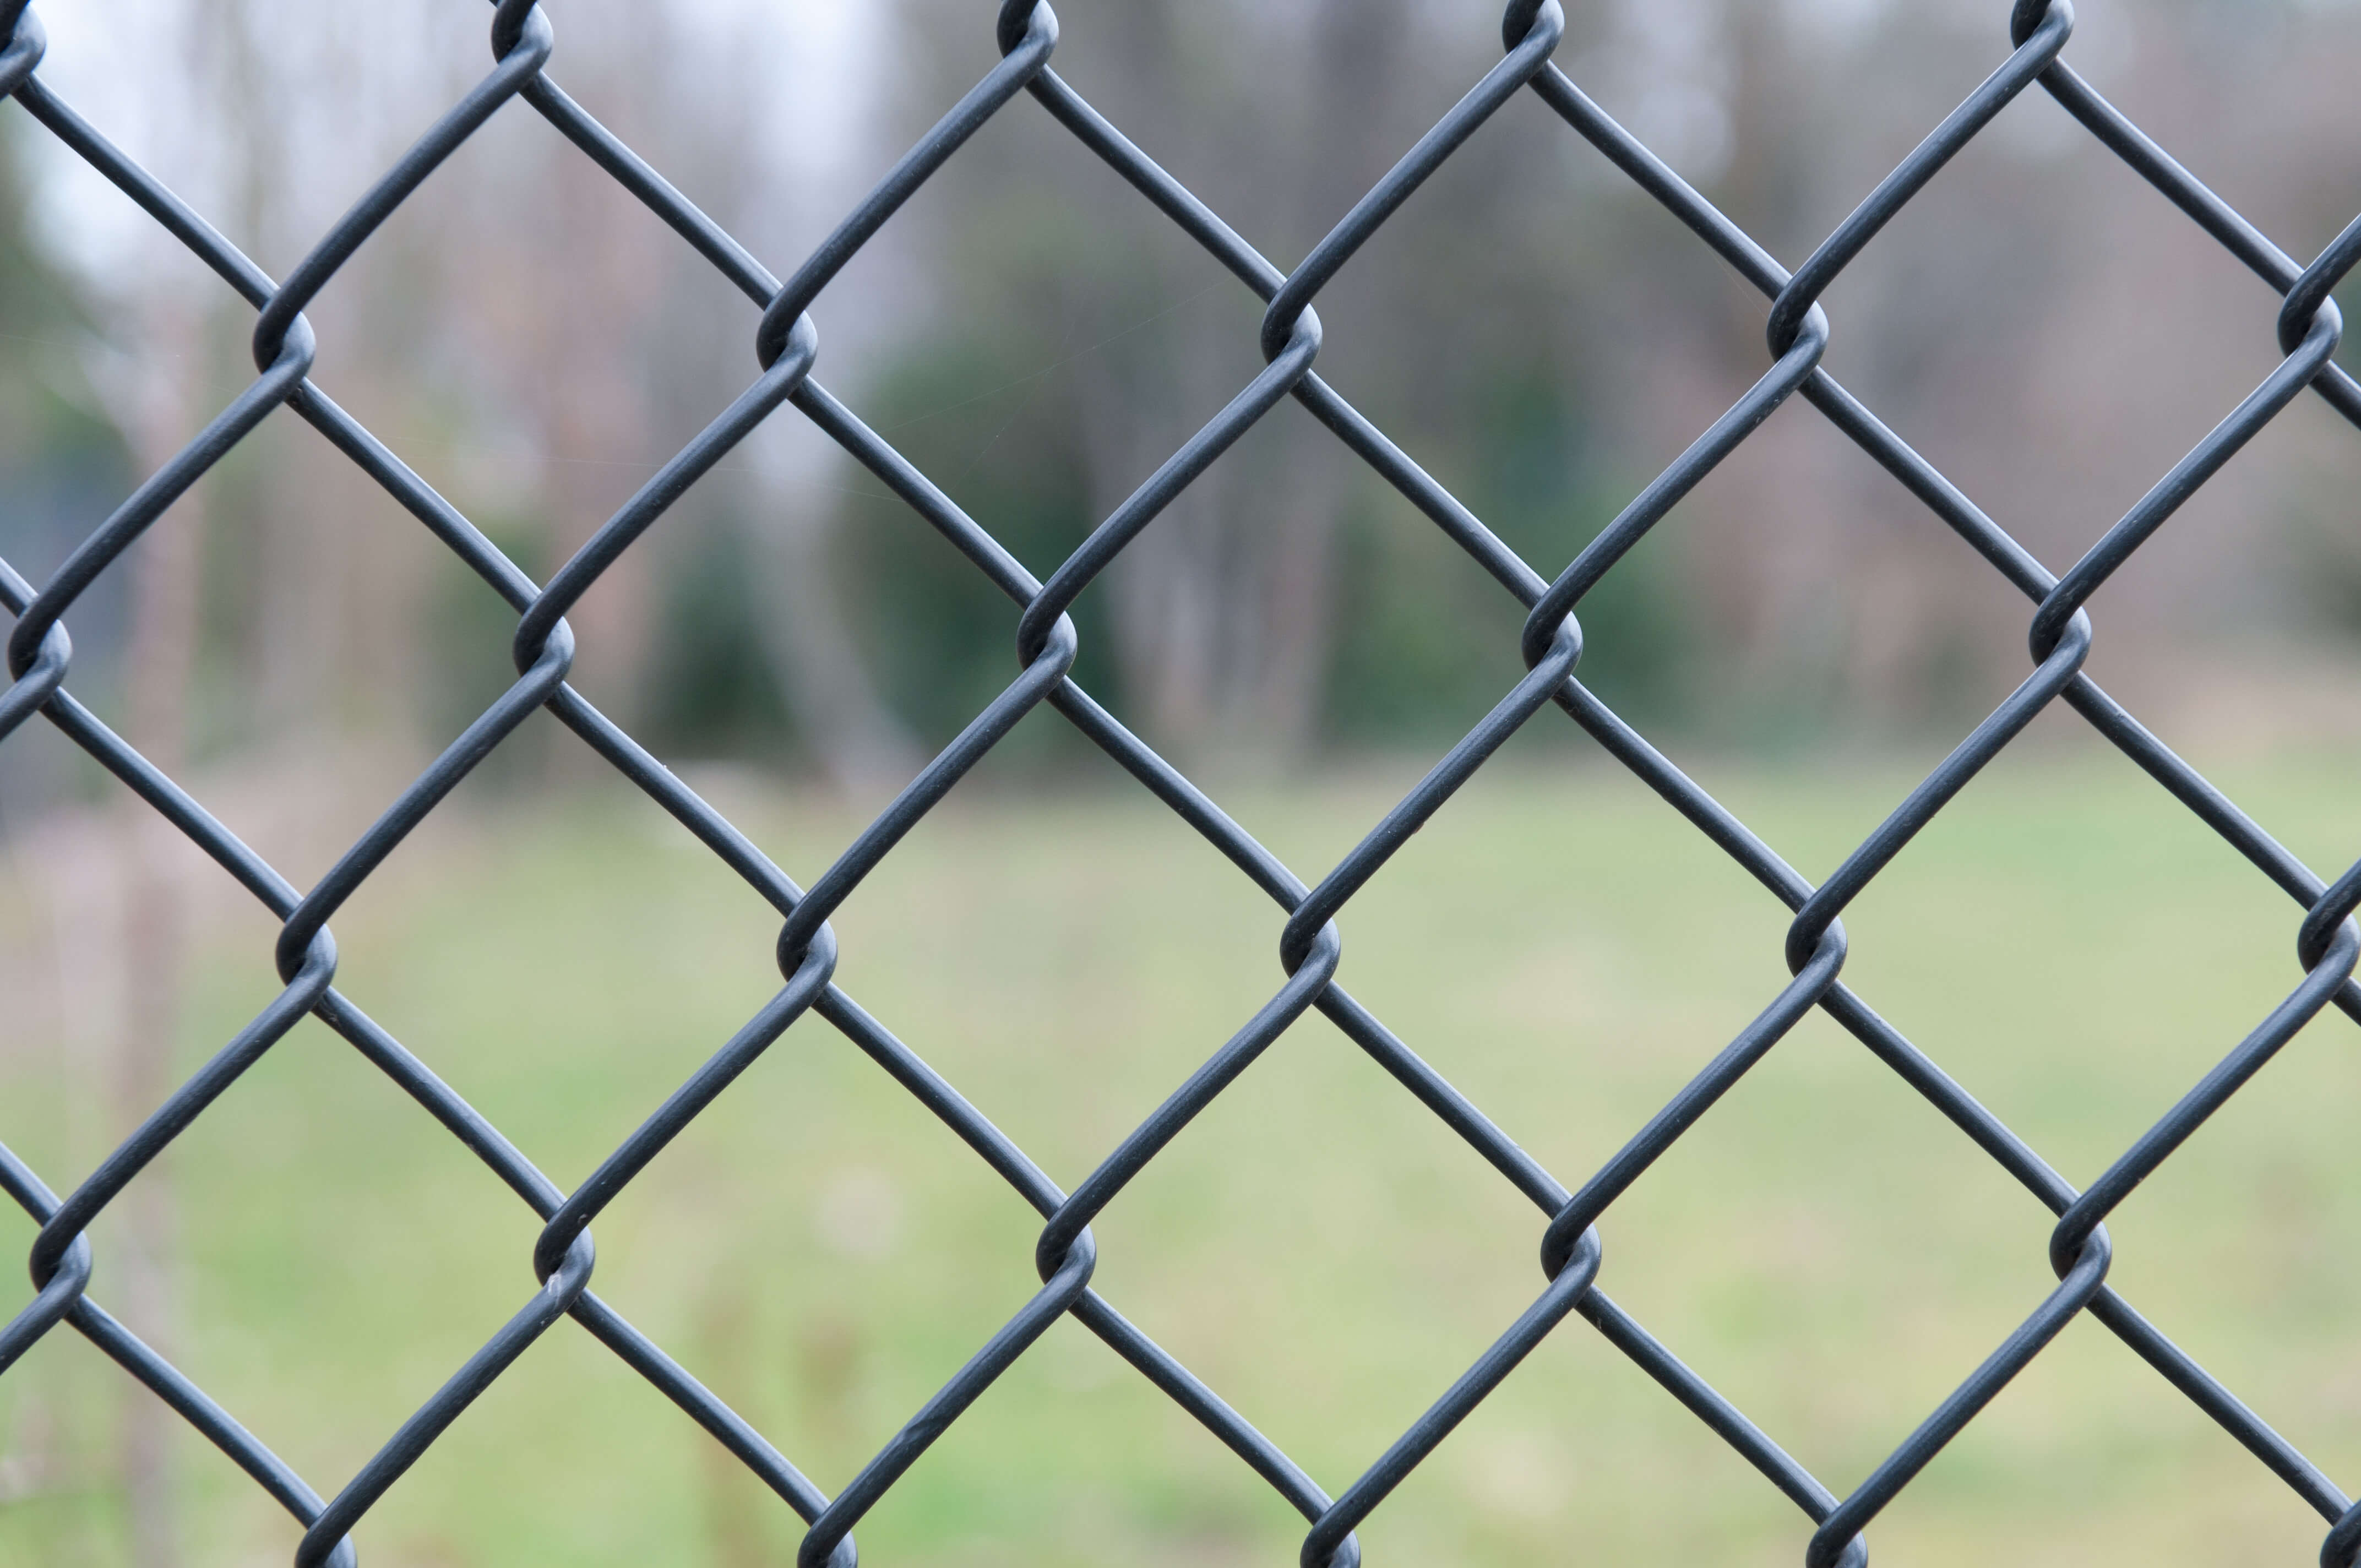 What kind of wire is suitable for the chain link fence